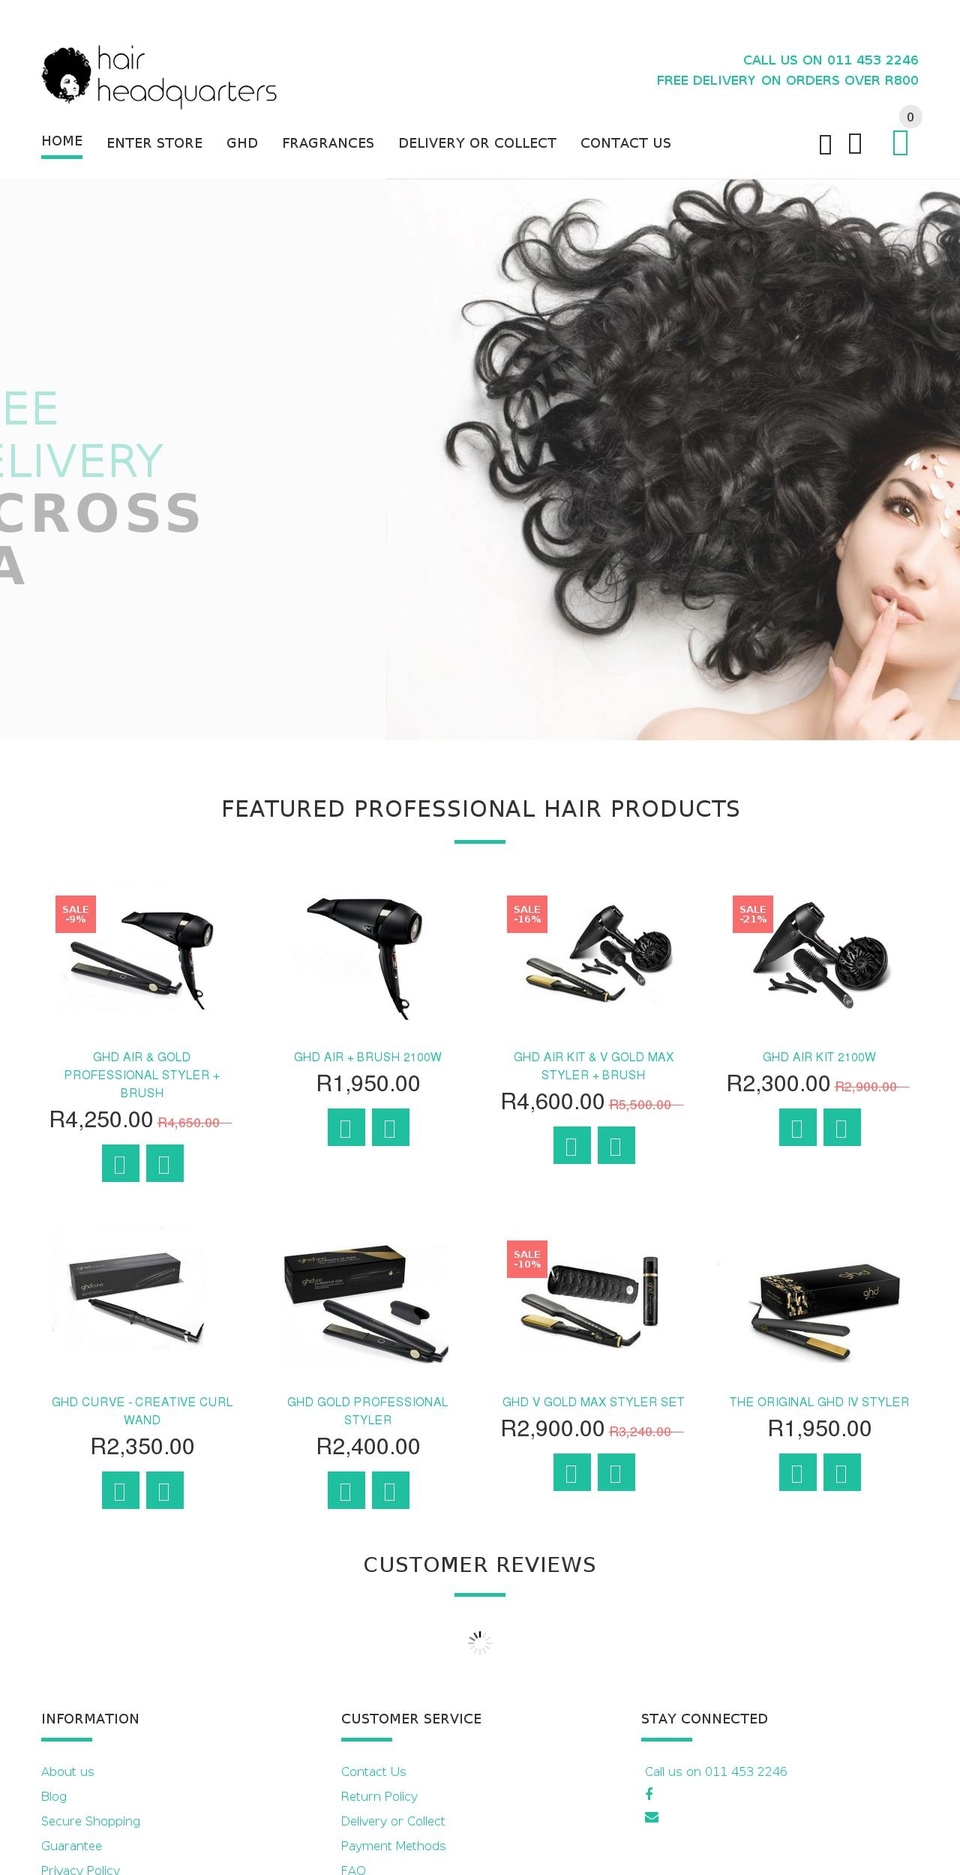 yourstore-v1-4-8 Shopify theme site example hairhq.co.za